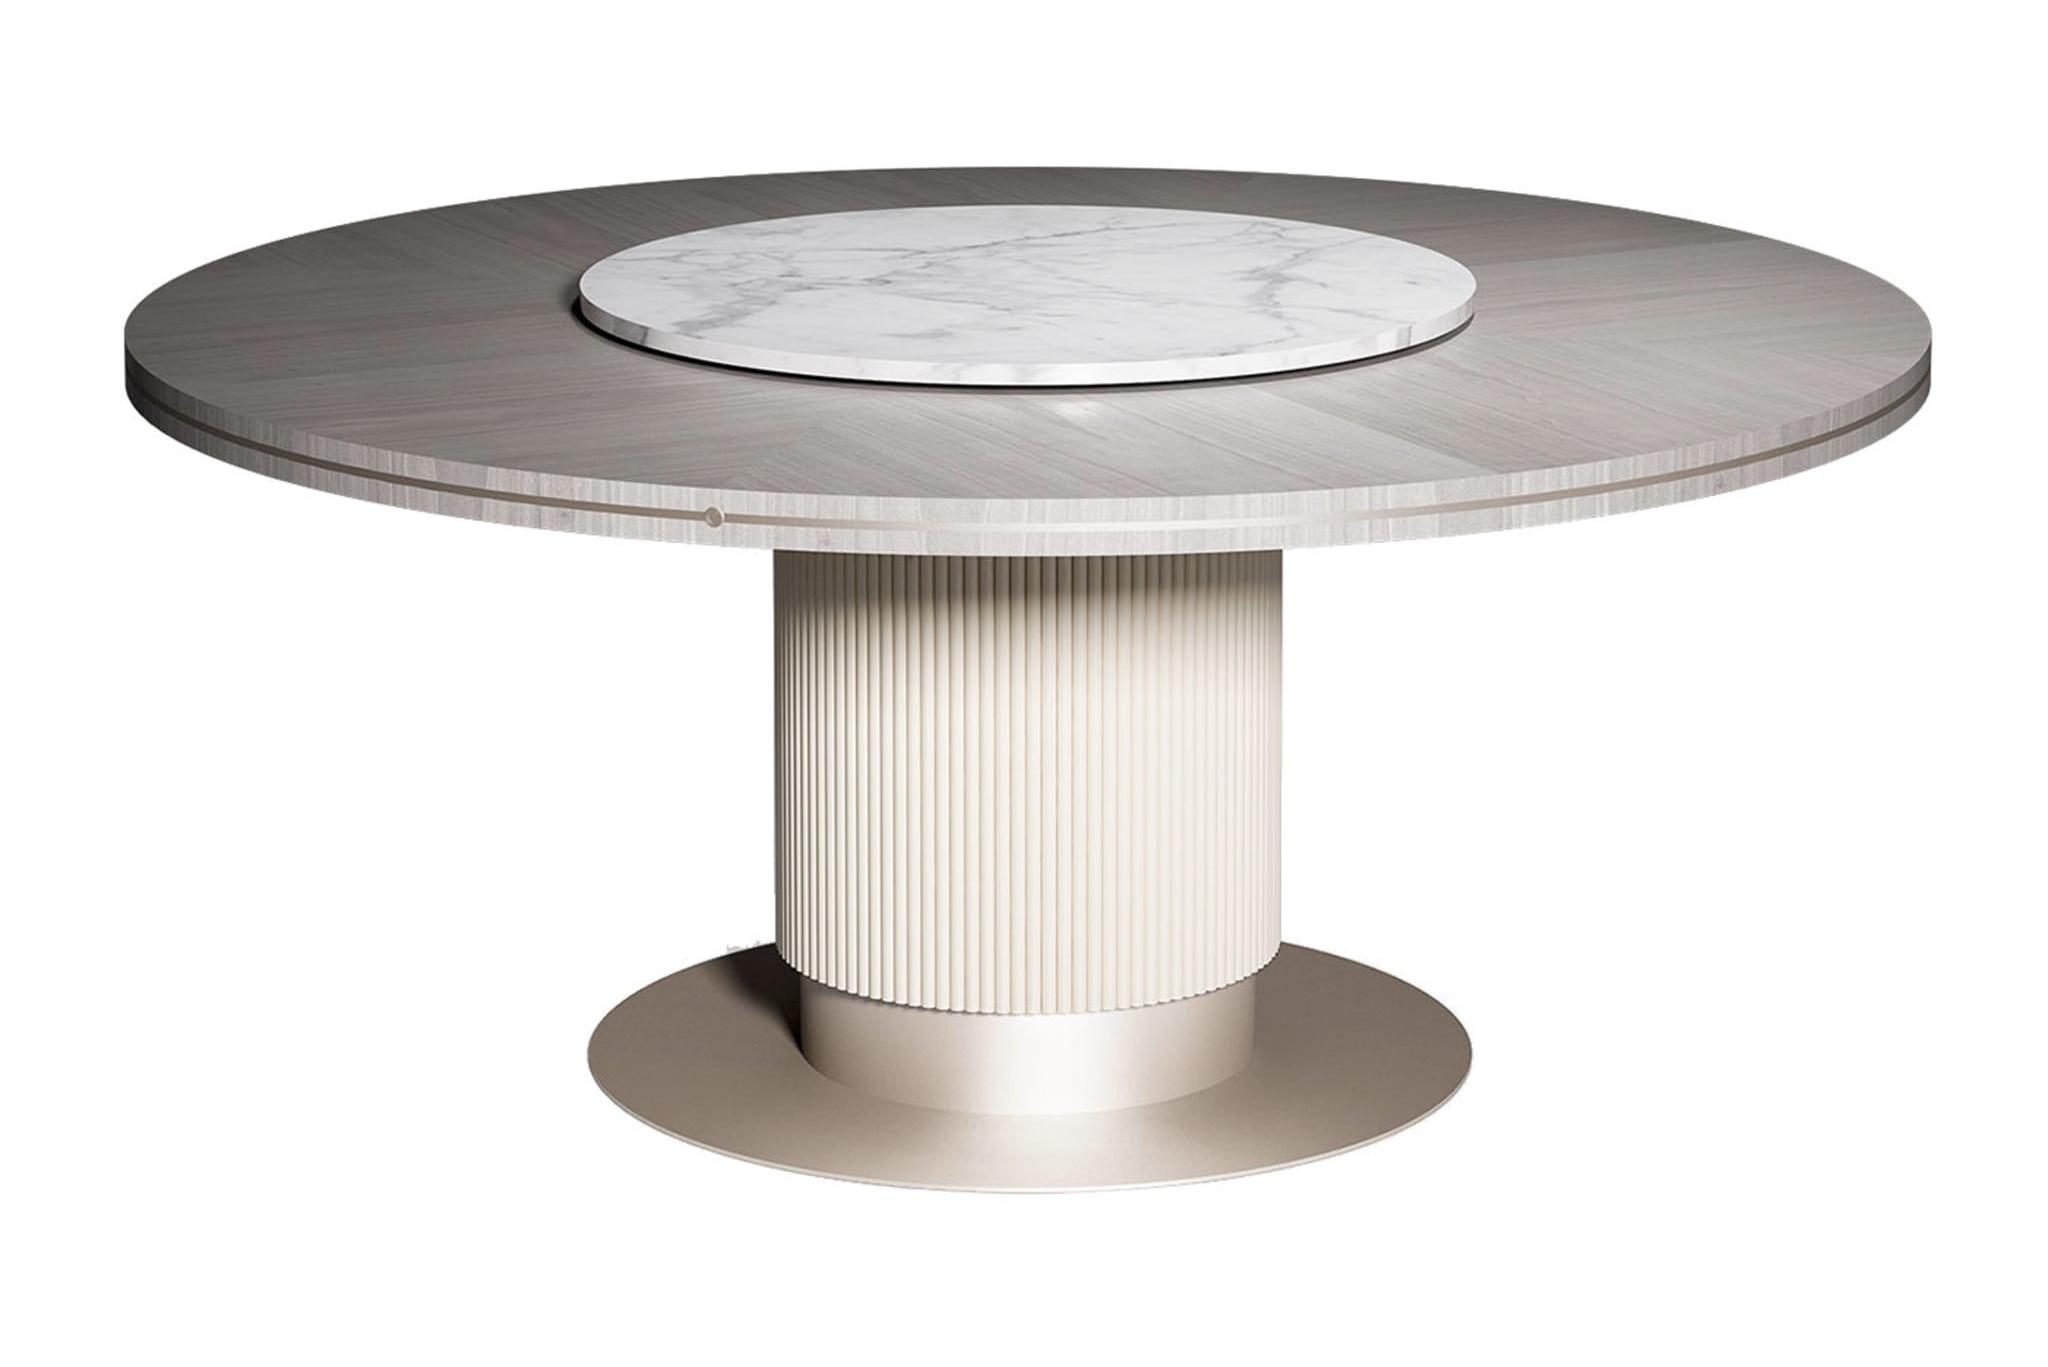 Cocoon Royal Round Dining Table ☞ Configuration: With Lazy Susan ☞ Dimensions: Ø 160 cm